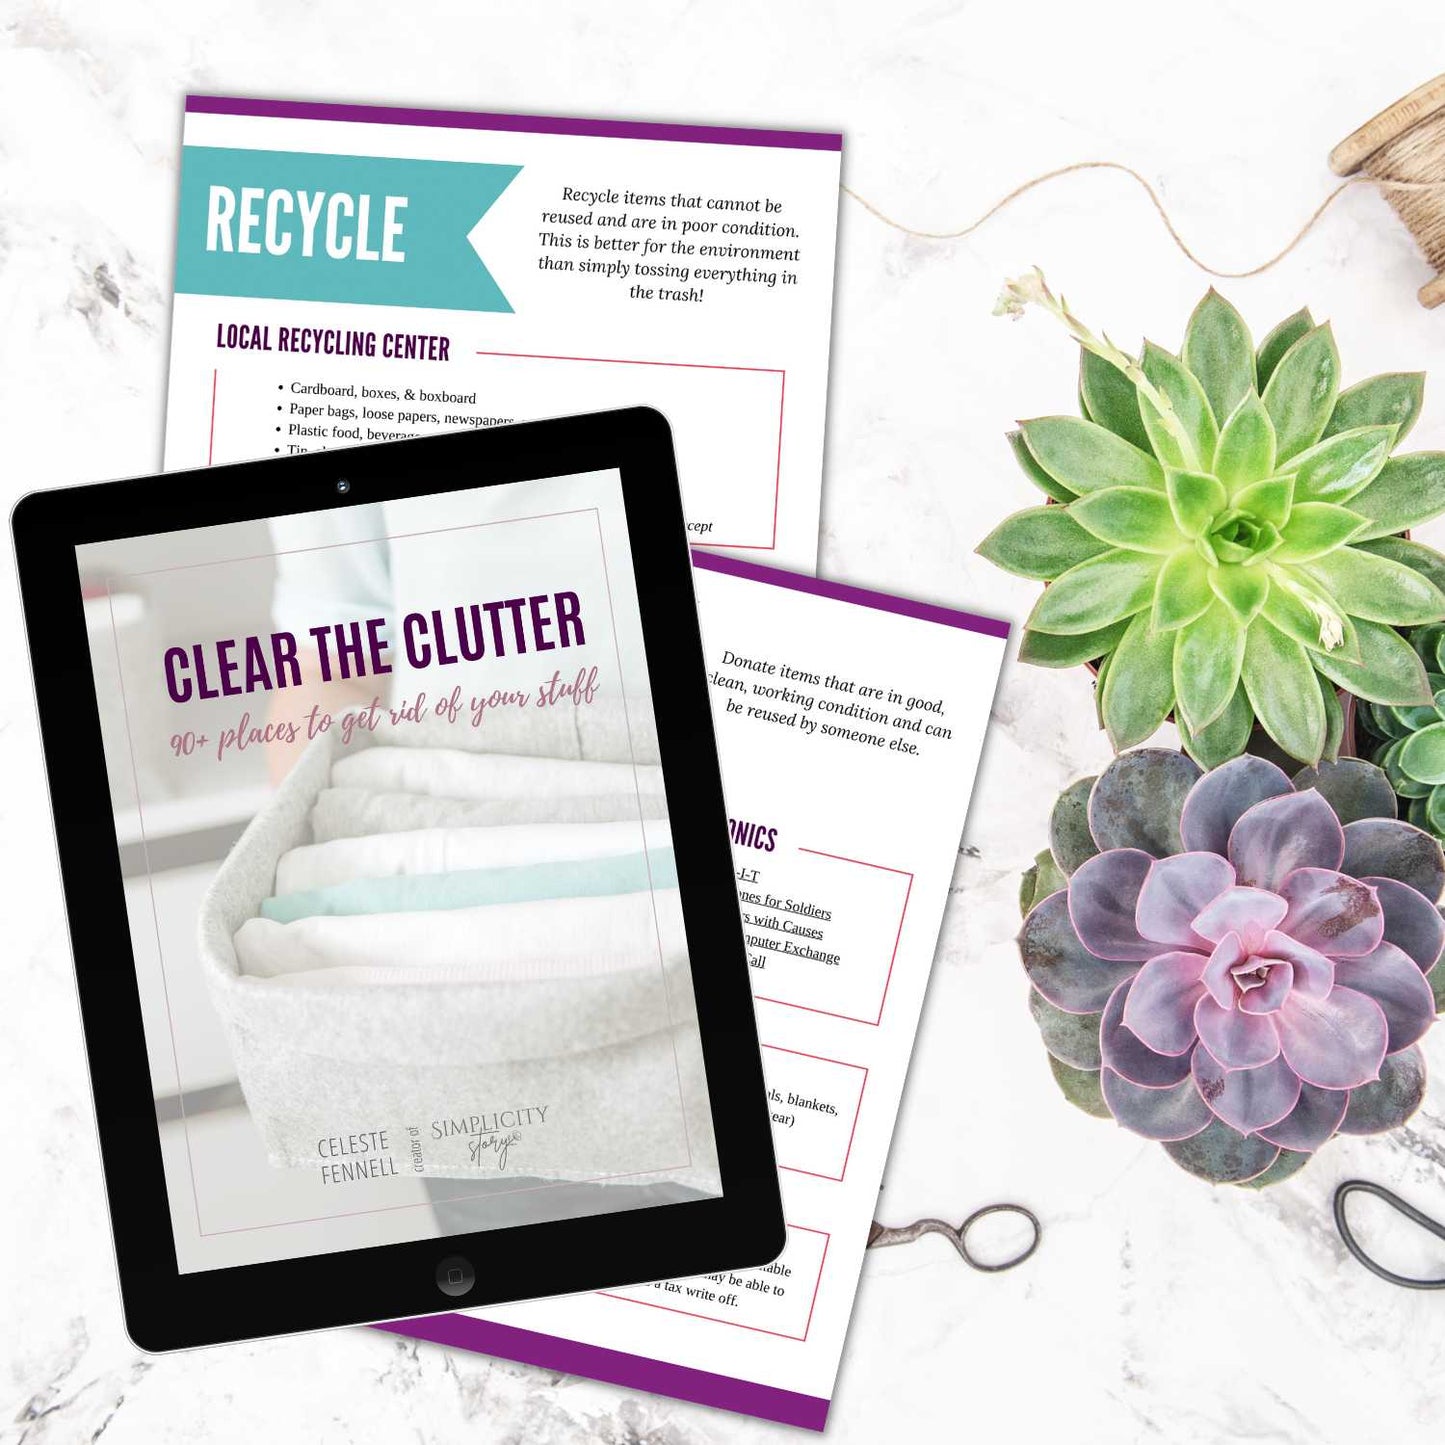 Clear the Clutter: 90+ Places to Get Rid of Your Stuff